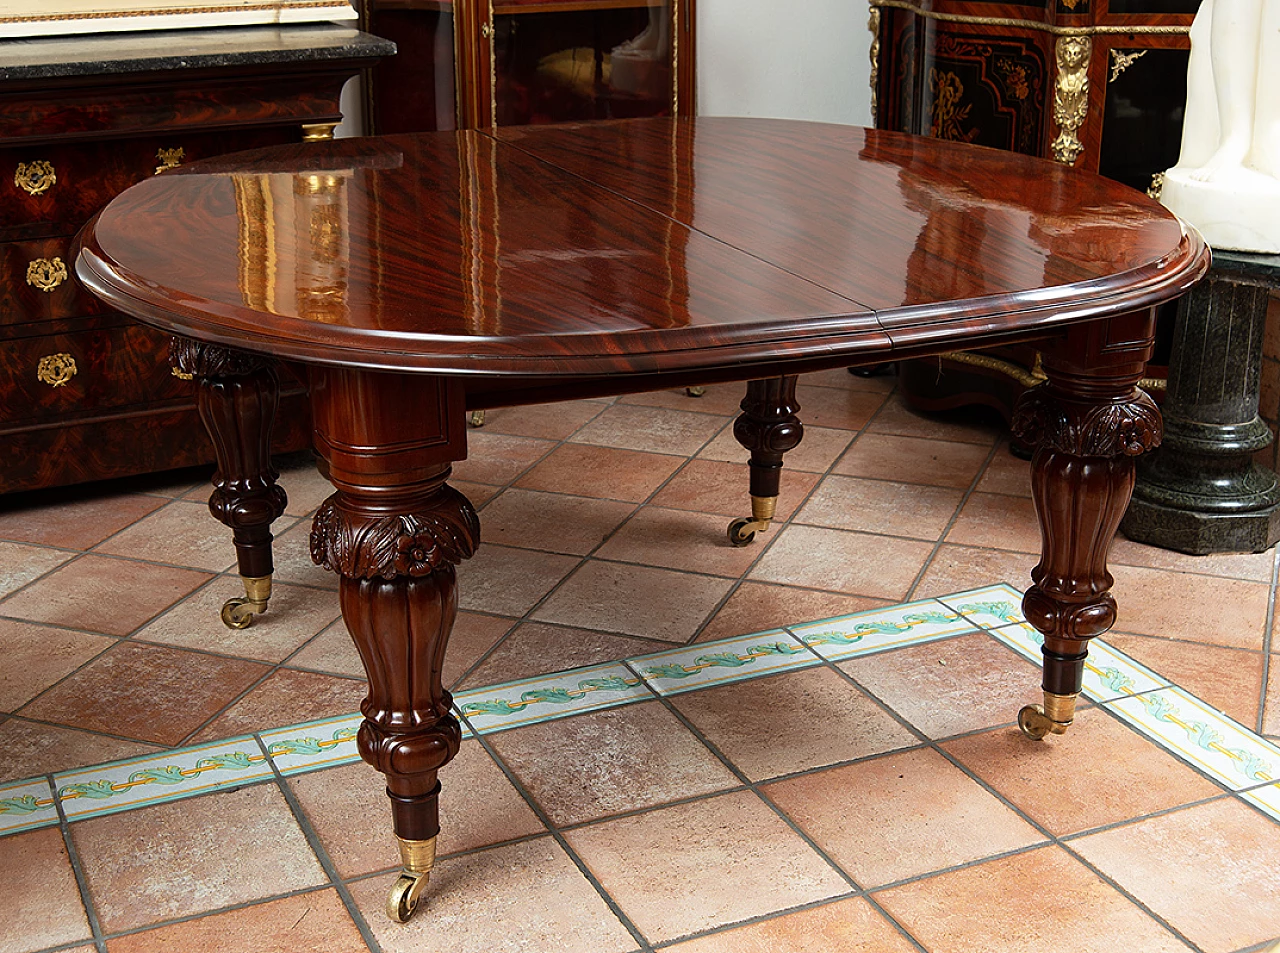 Victorian extendable solid mahogany table with casters, mid-19th century 2